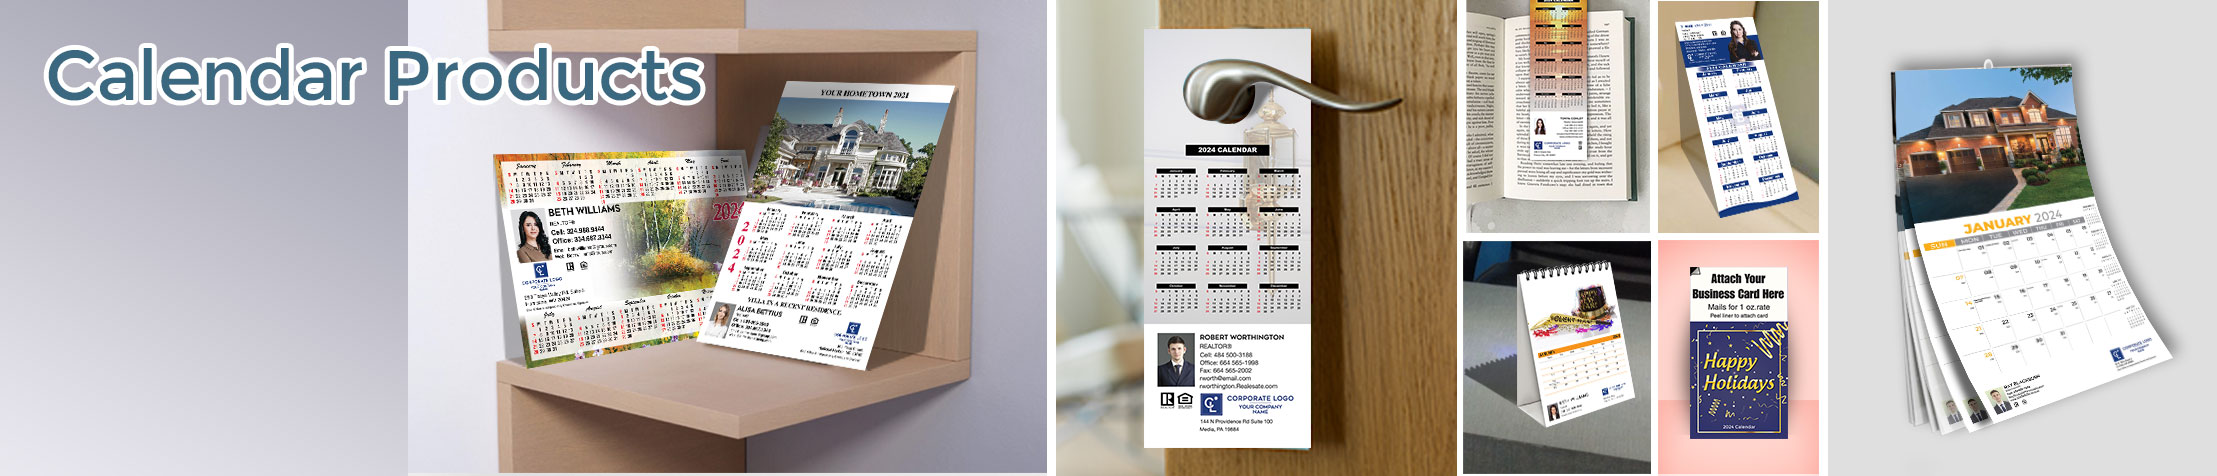 Coldwell Banker Real Estate Calendar Products - Coldwell Banker  2019 calendars, magnets, door hangers, bookmarks, tear away note pads | BestPrintBuy.com